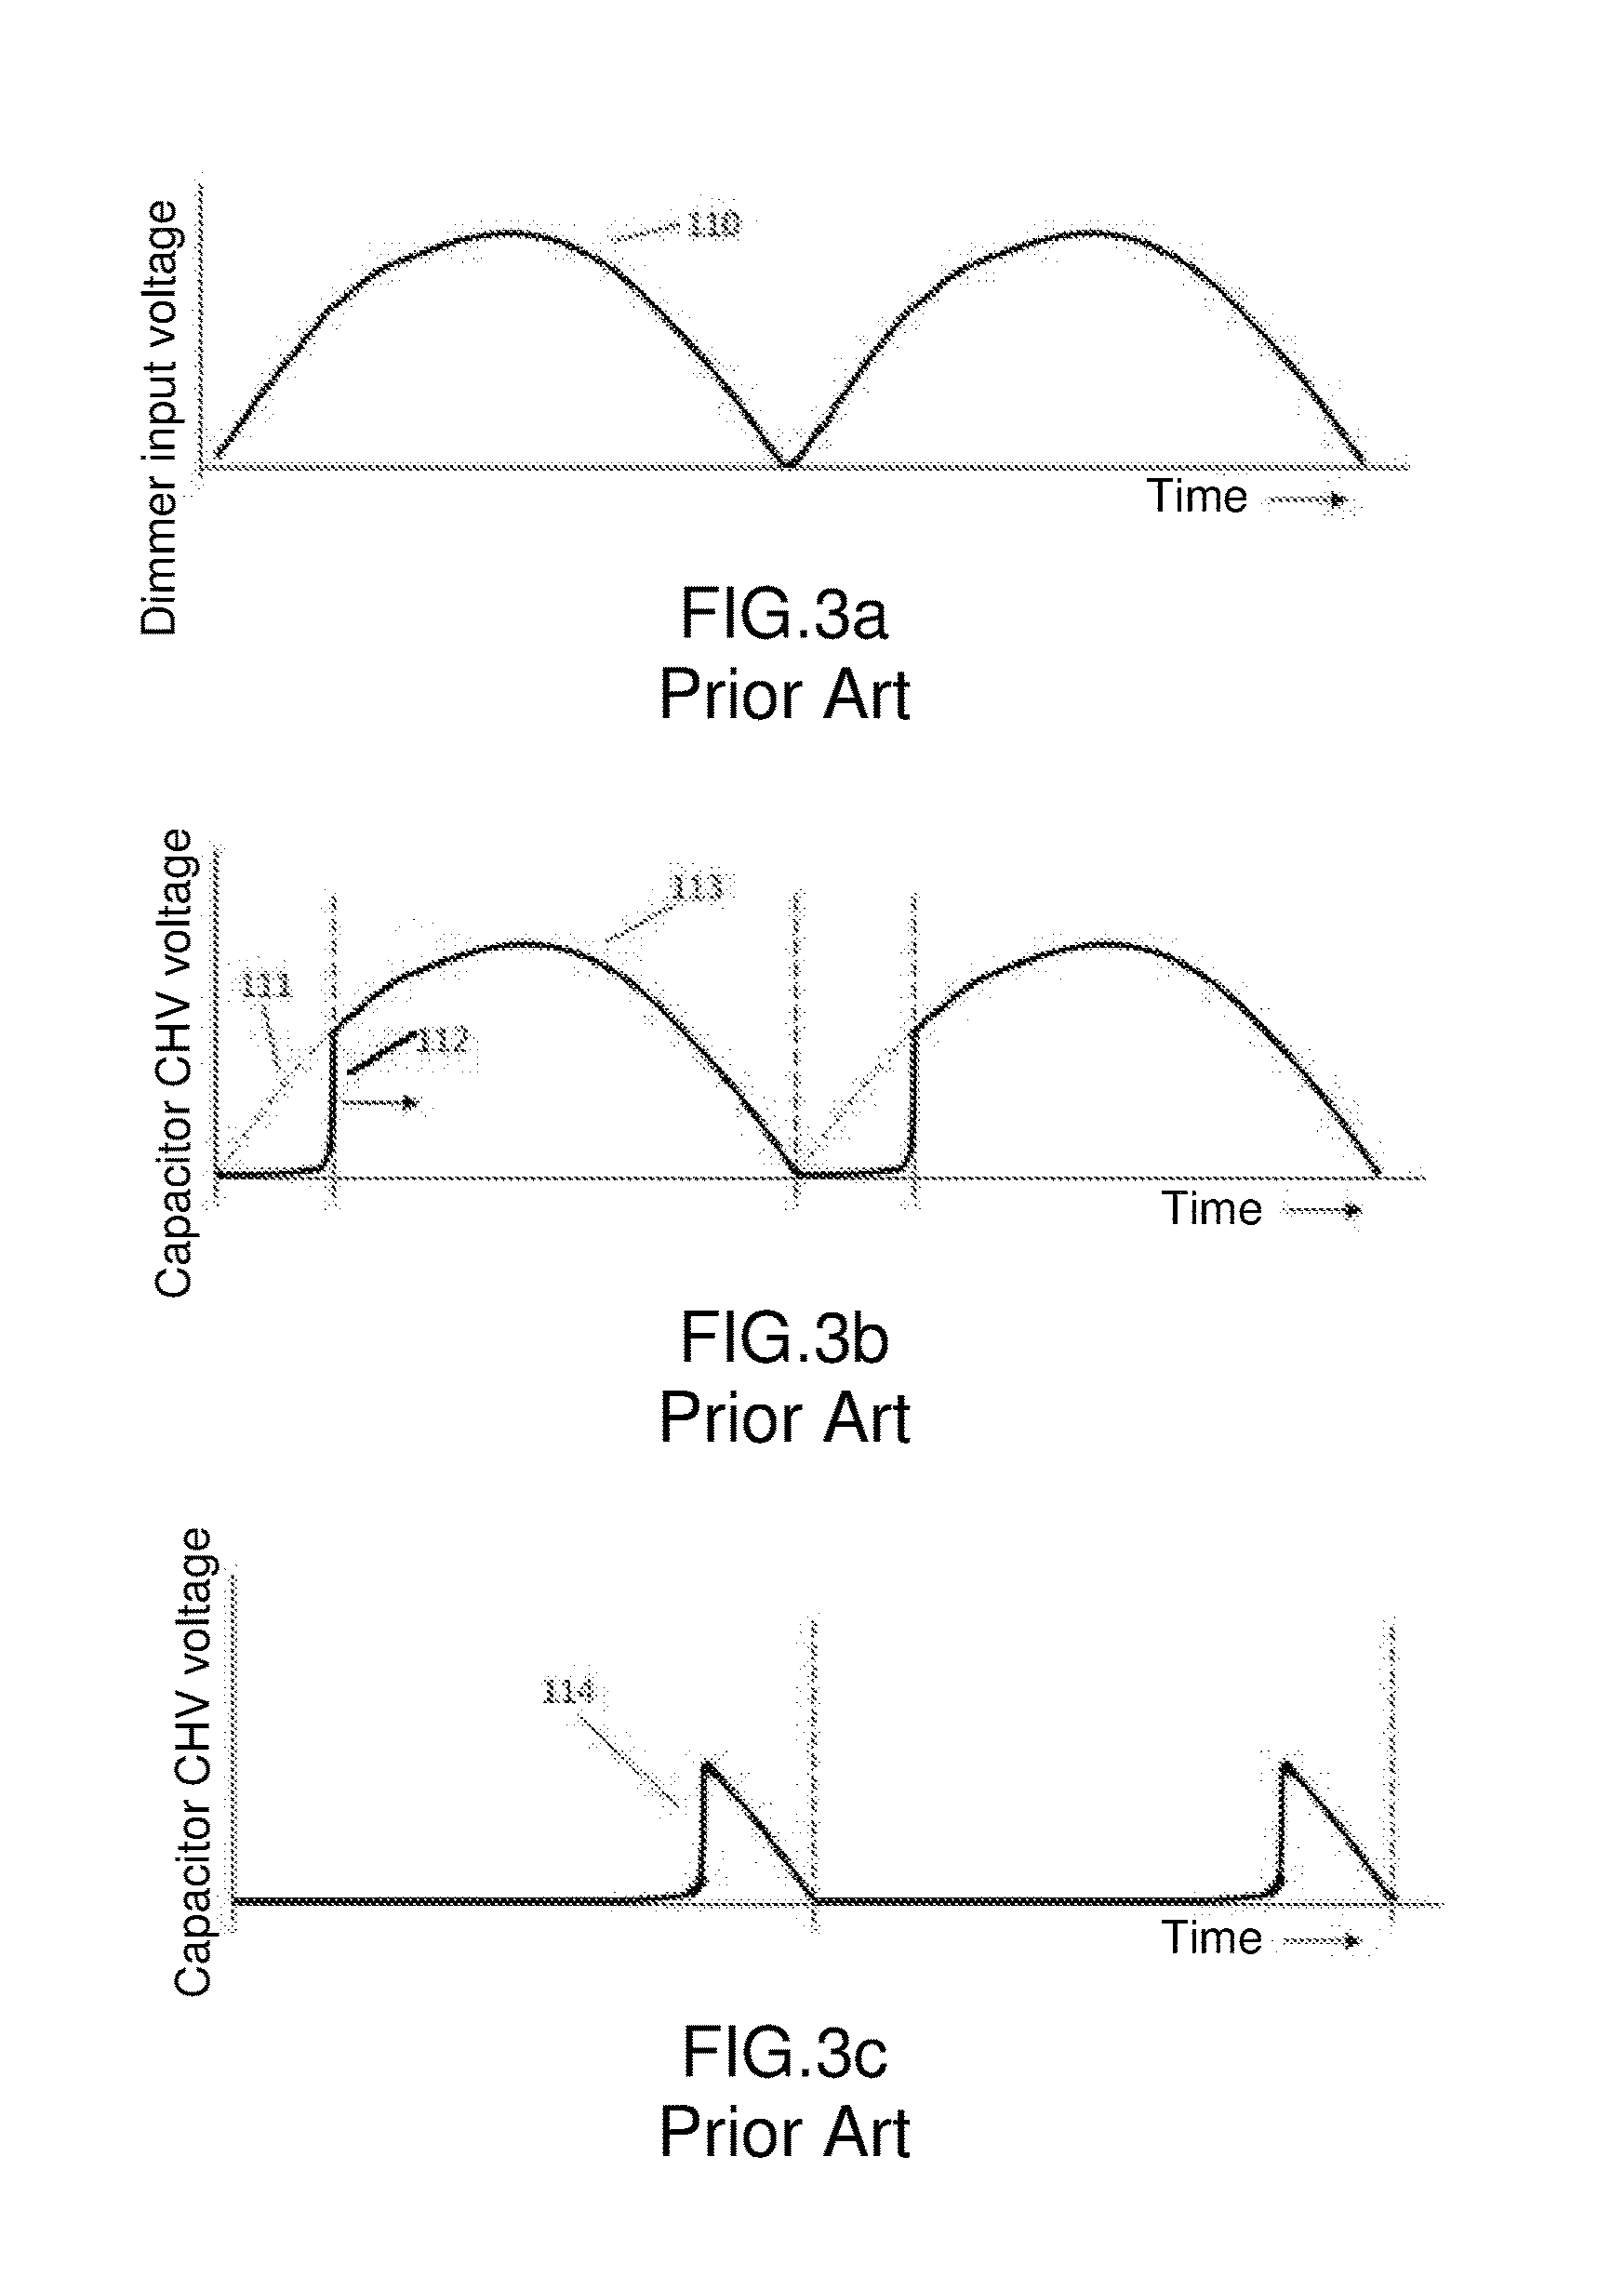 Self-adjusting power supply circuit of silicon controlled dimming in LED lighting